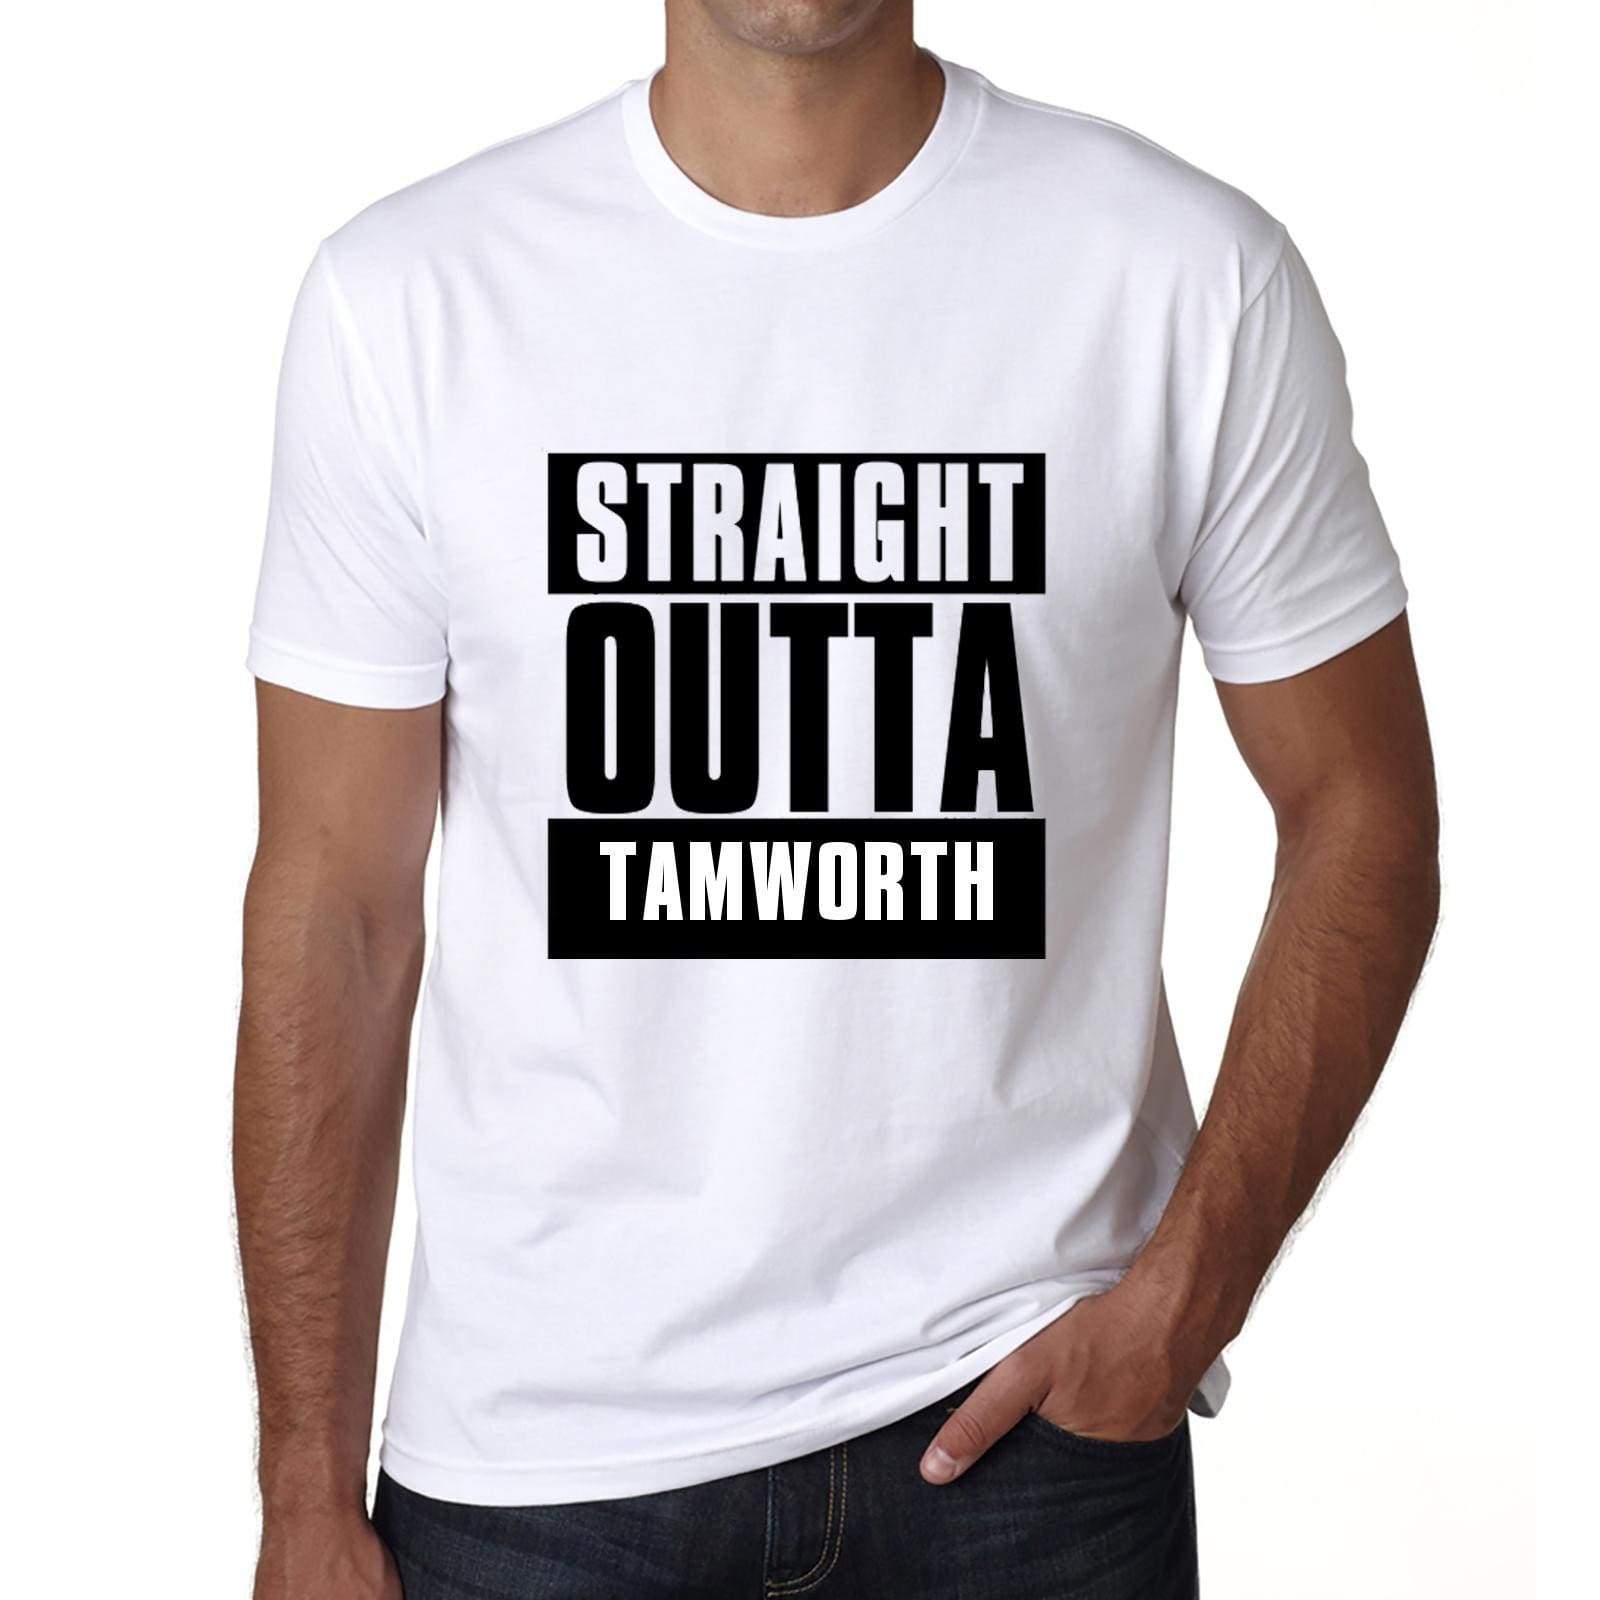 Straight Outta Tamworth Mens Short Sleeve Round Neck T-Shirt 00027 - White / S - Casual